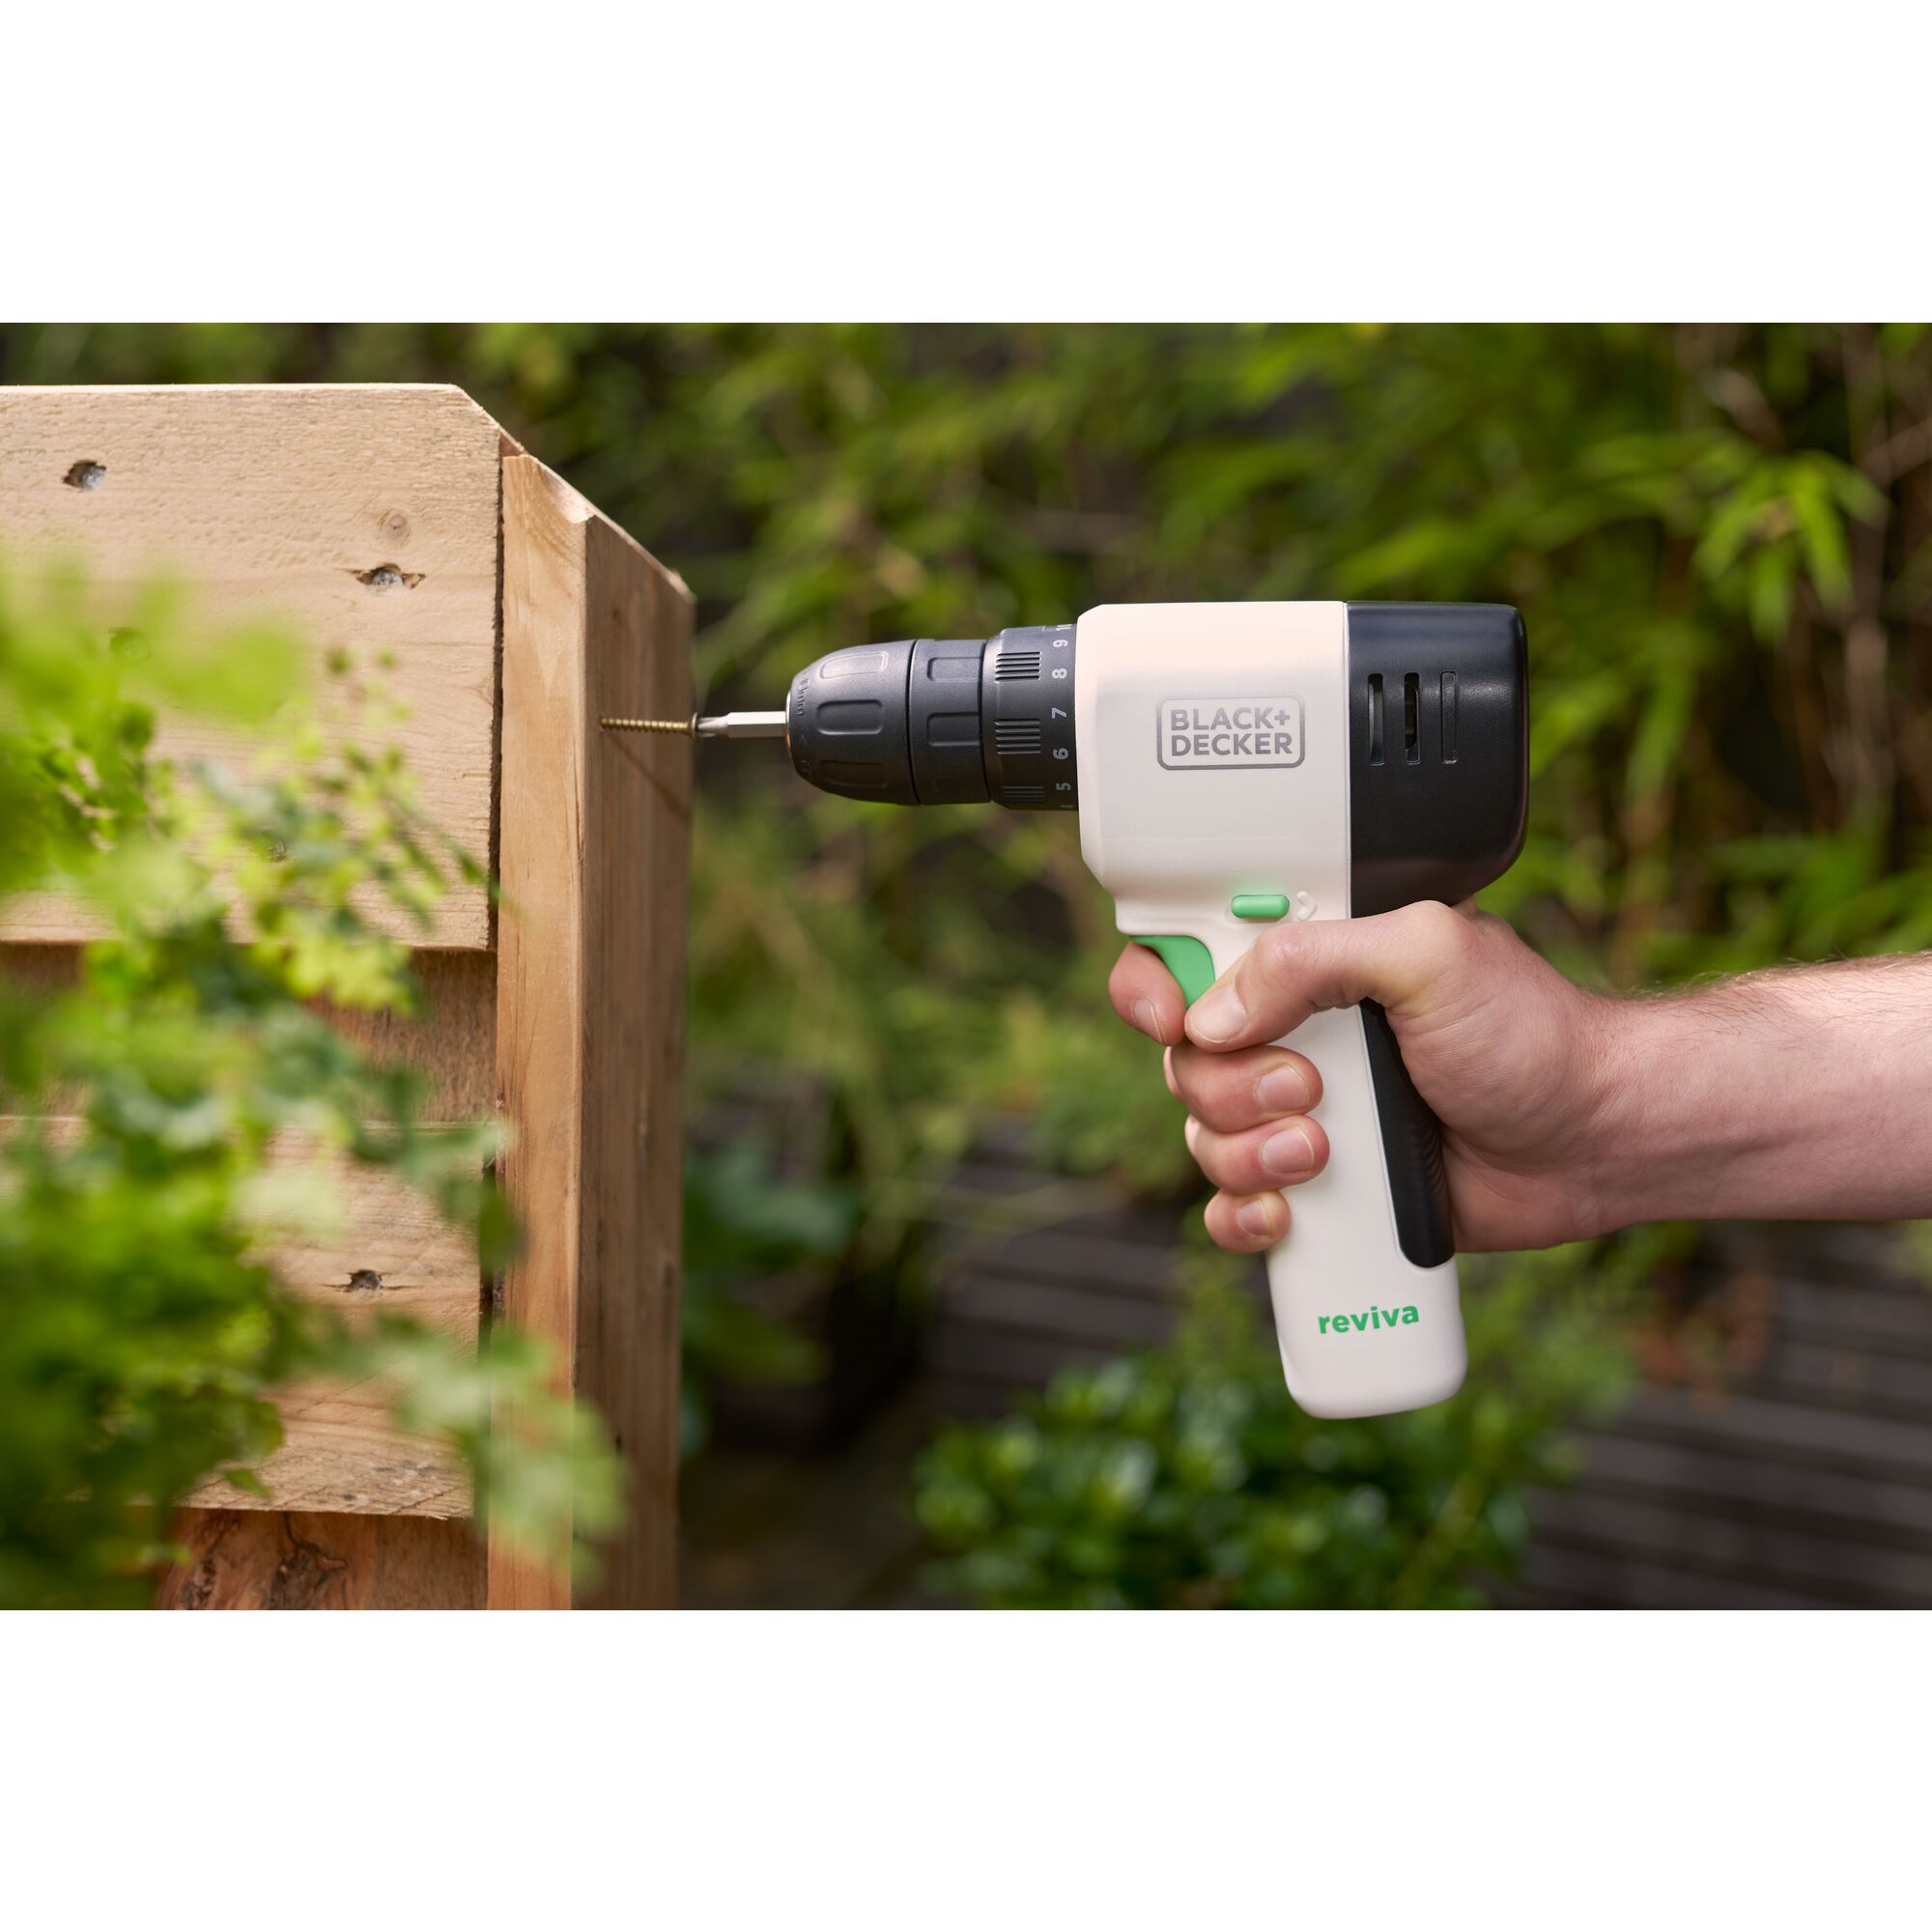 Hand using reviva™ 12V MAX* Cordless Drill/Driver to fasten a screw into a wood garden bed.